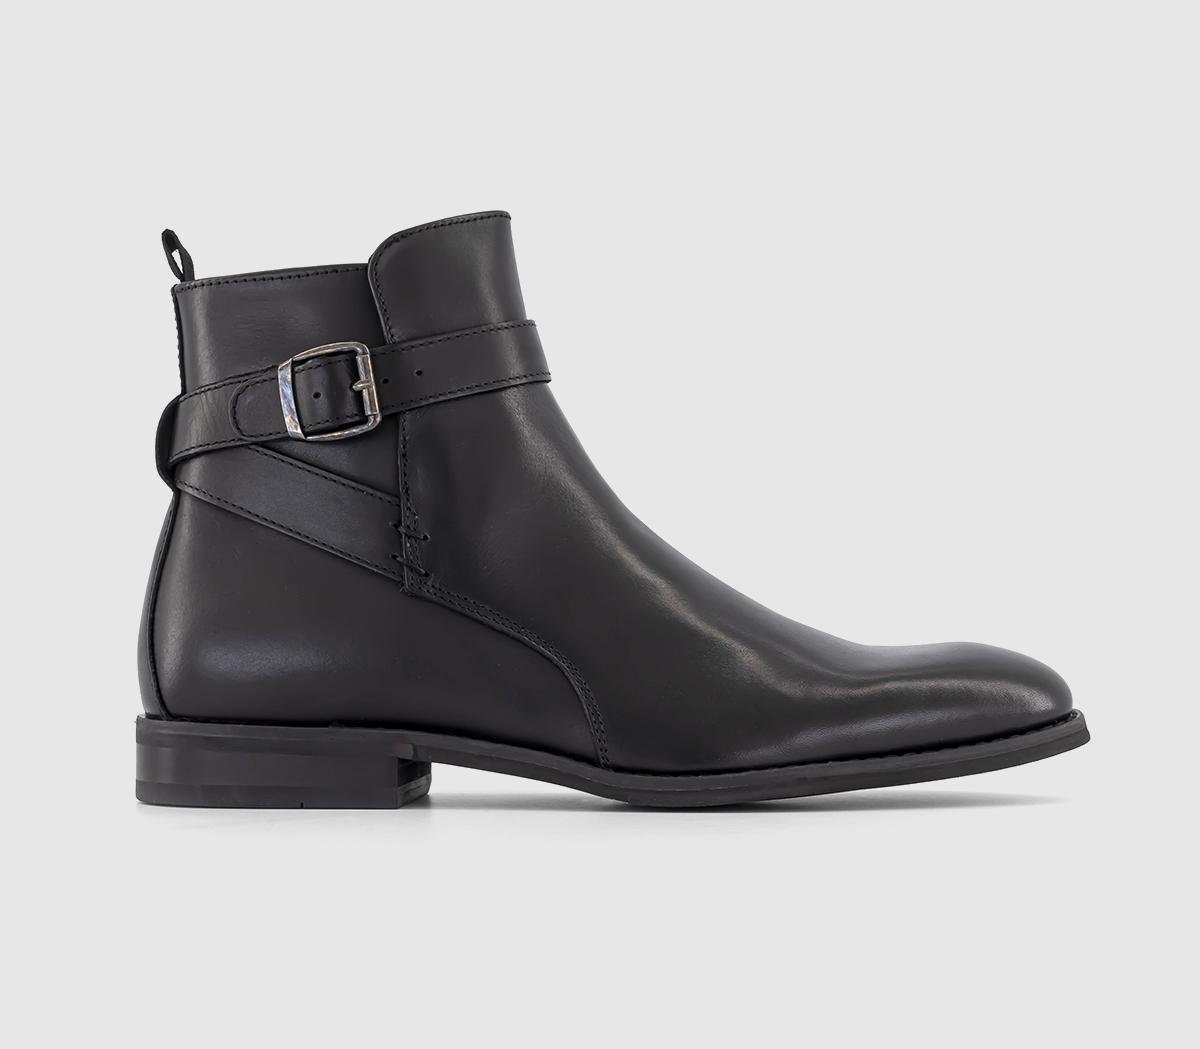 OFFICE Belfort Ankle Strap Boots Black Leather - Men’s Boots